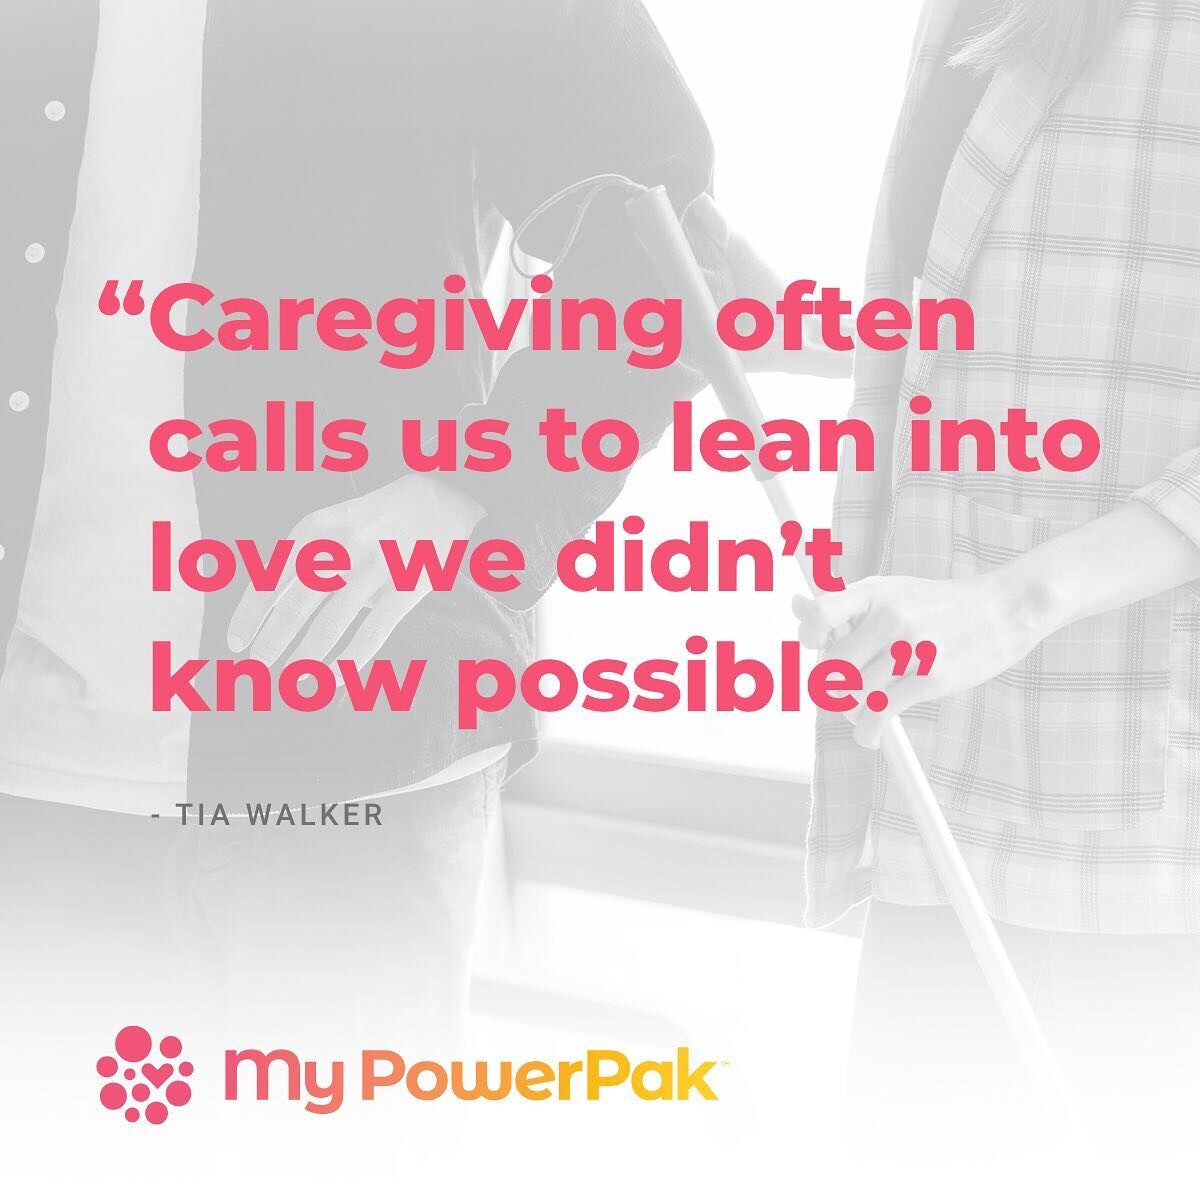 New experiences are a given for anyone thrust into the role of informal caregiver. However, it&rsquo;s the bonds that develop between caregivers and care-receivers that are often the most unexpected takeaways from providing care. To learn how My Powe